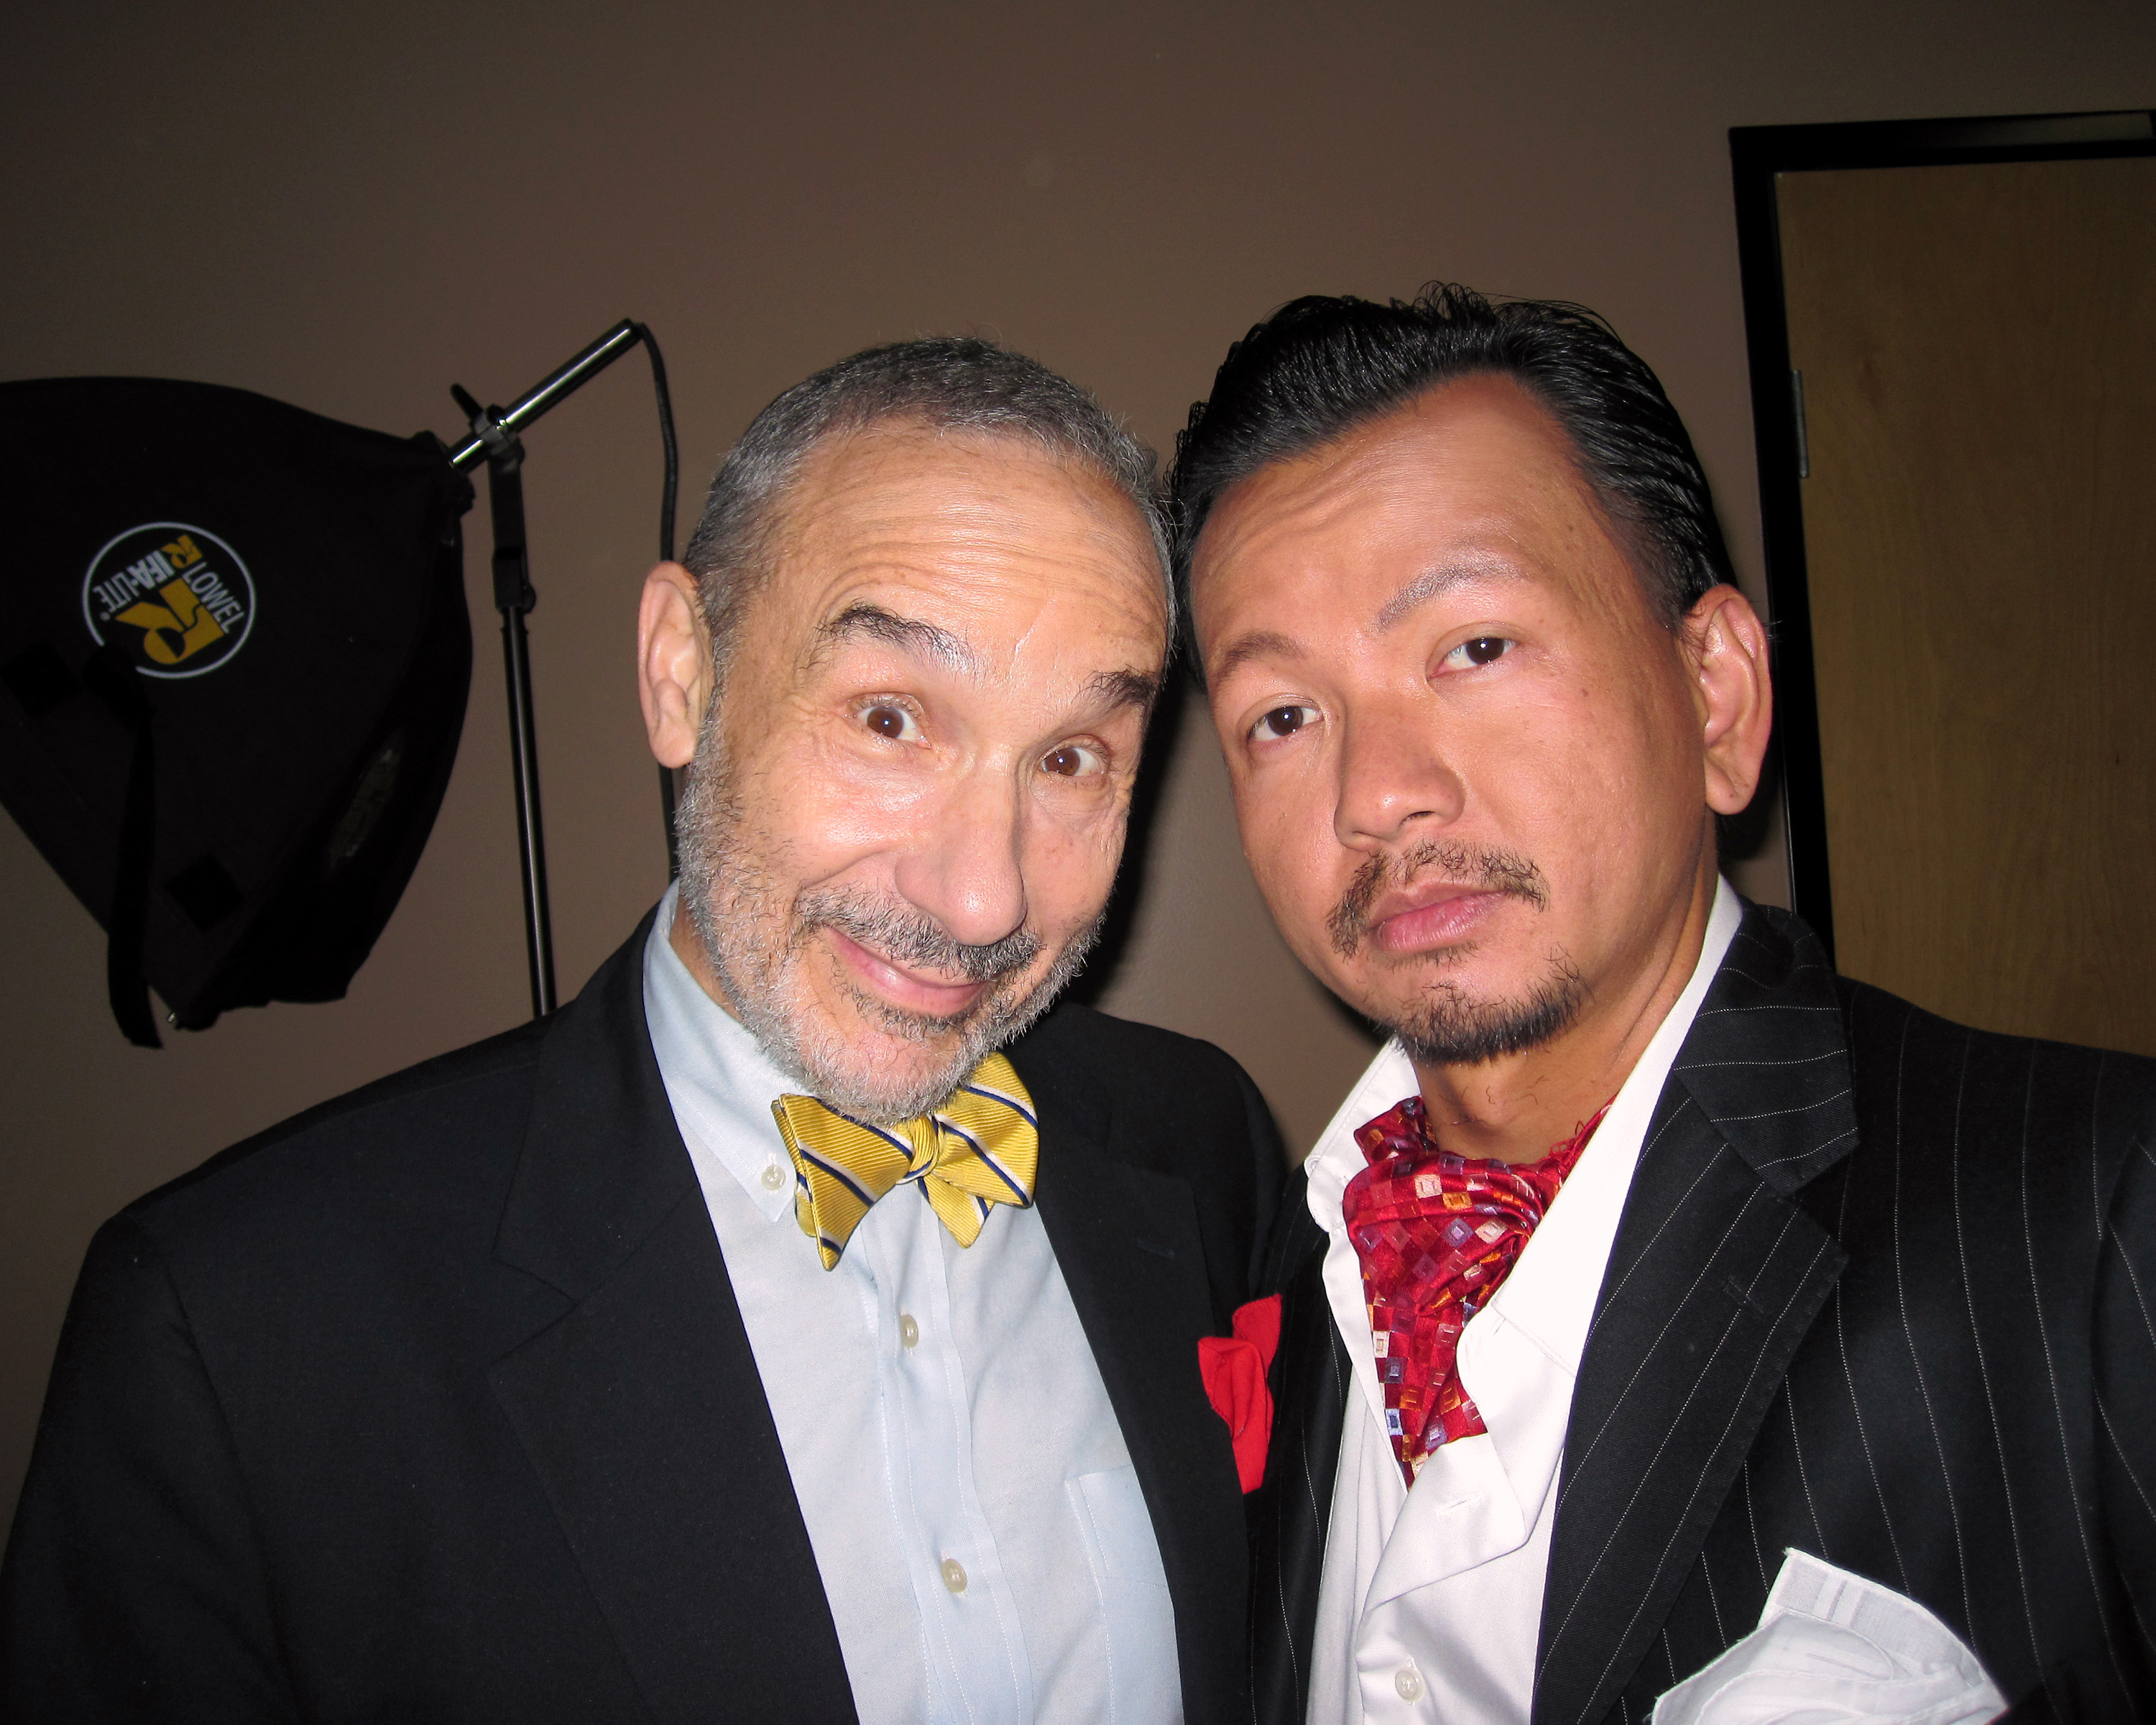 Lloyd Kaufman and Kevin Trang in 